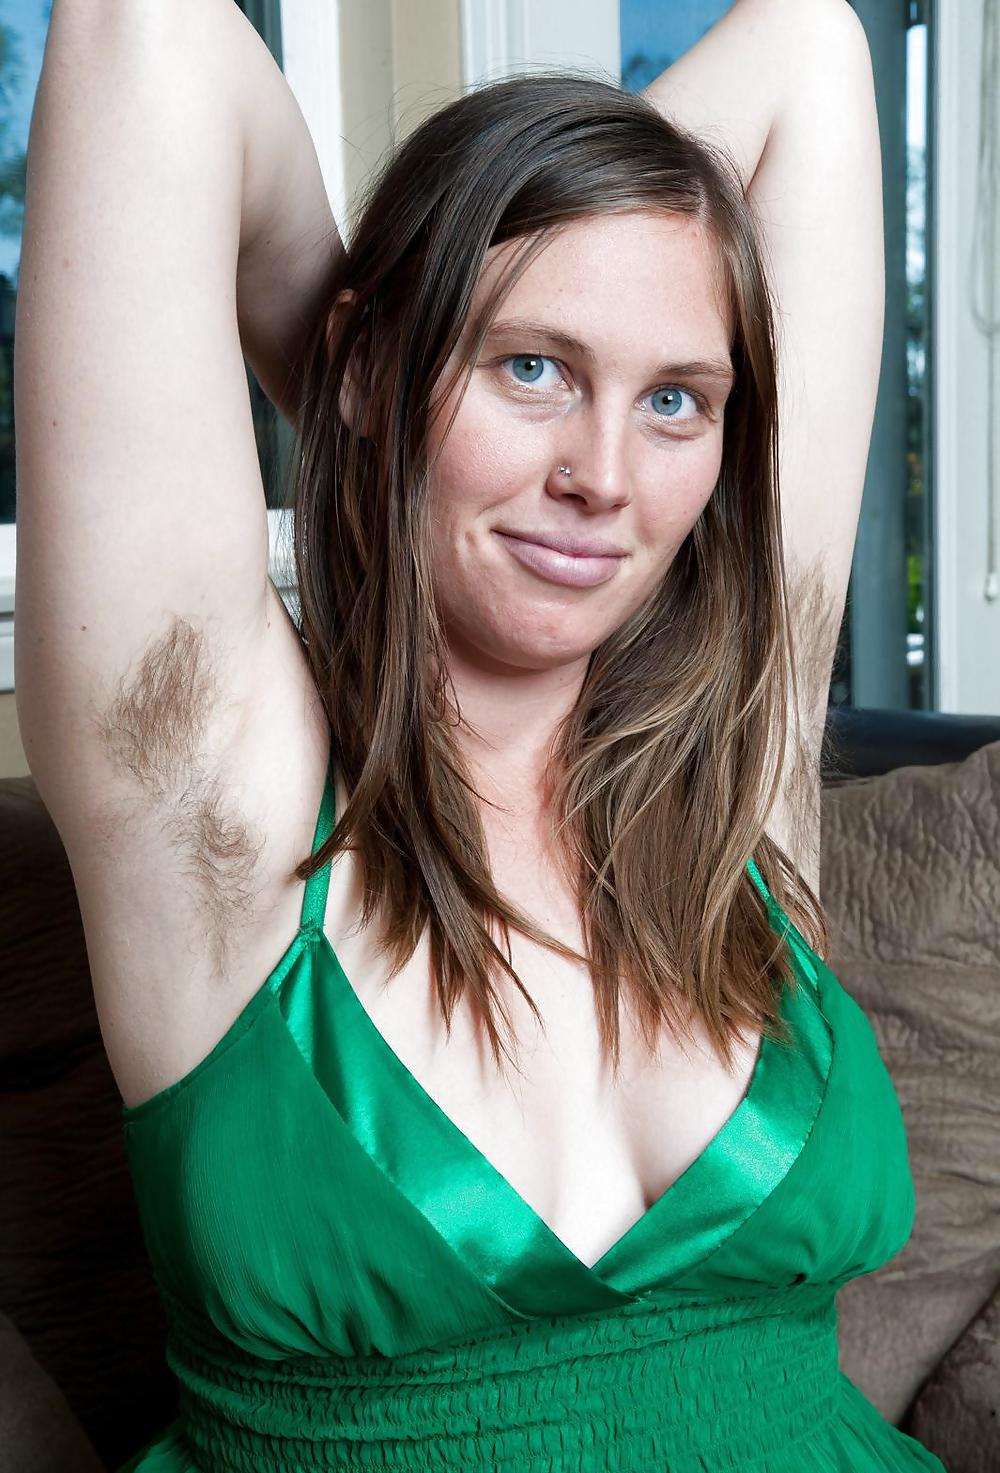 Miscellaneous girls showing hairy, unshaven armpits 2 #36246666